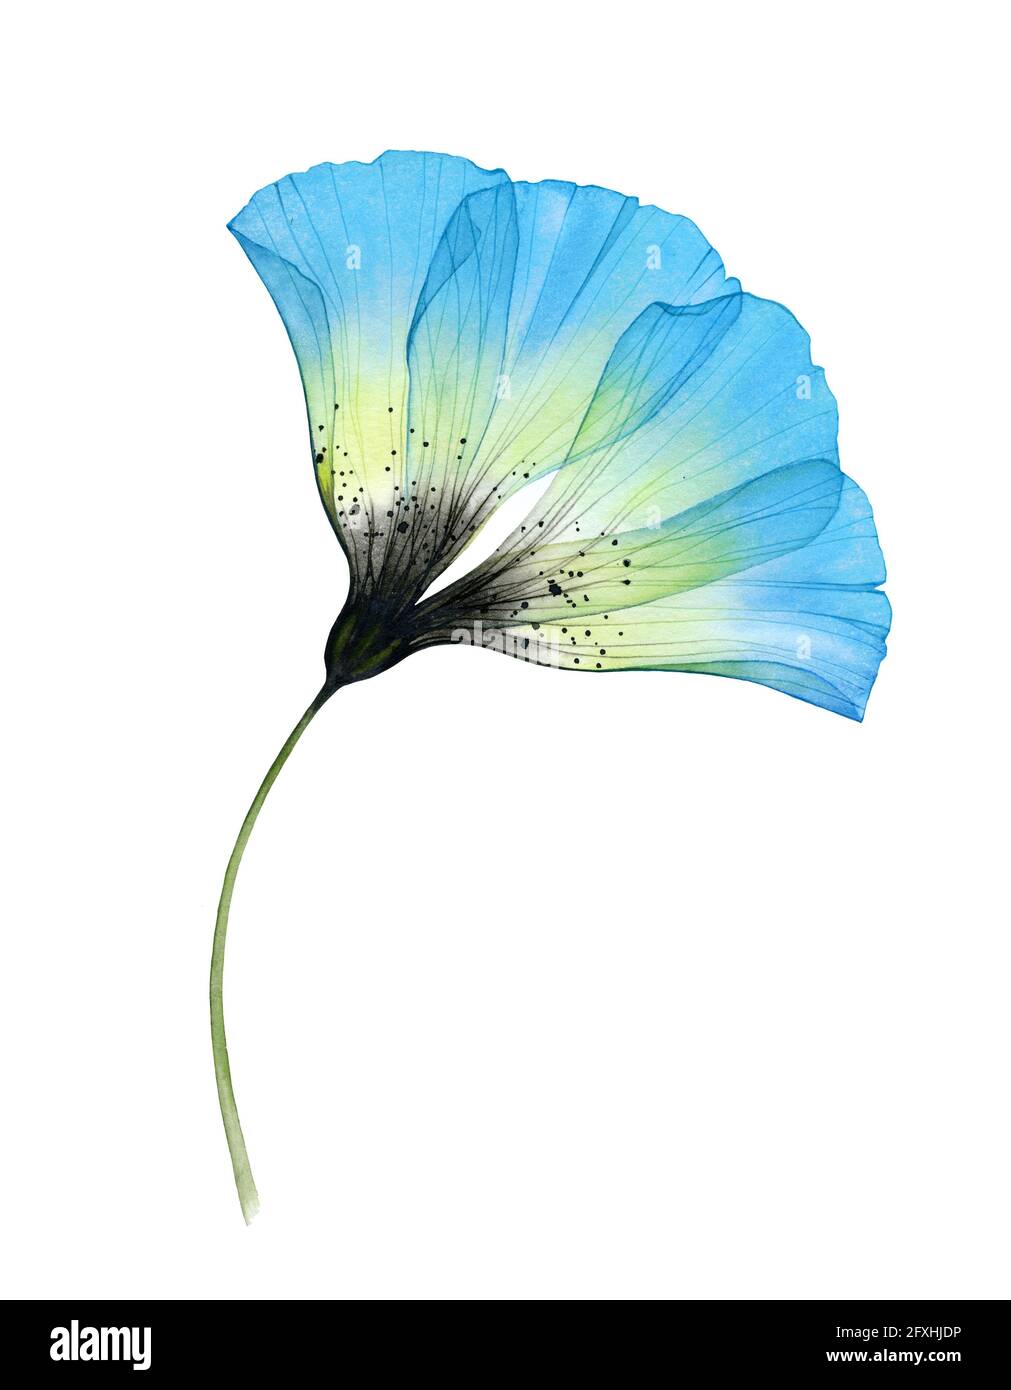 Watercolor blue flower. Hand painted transparent anemone with detailed petals. Botanical illustration for wedding design, greeting cards Stock Photo